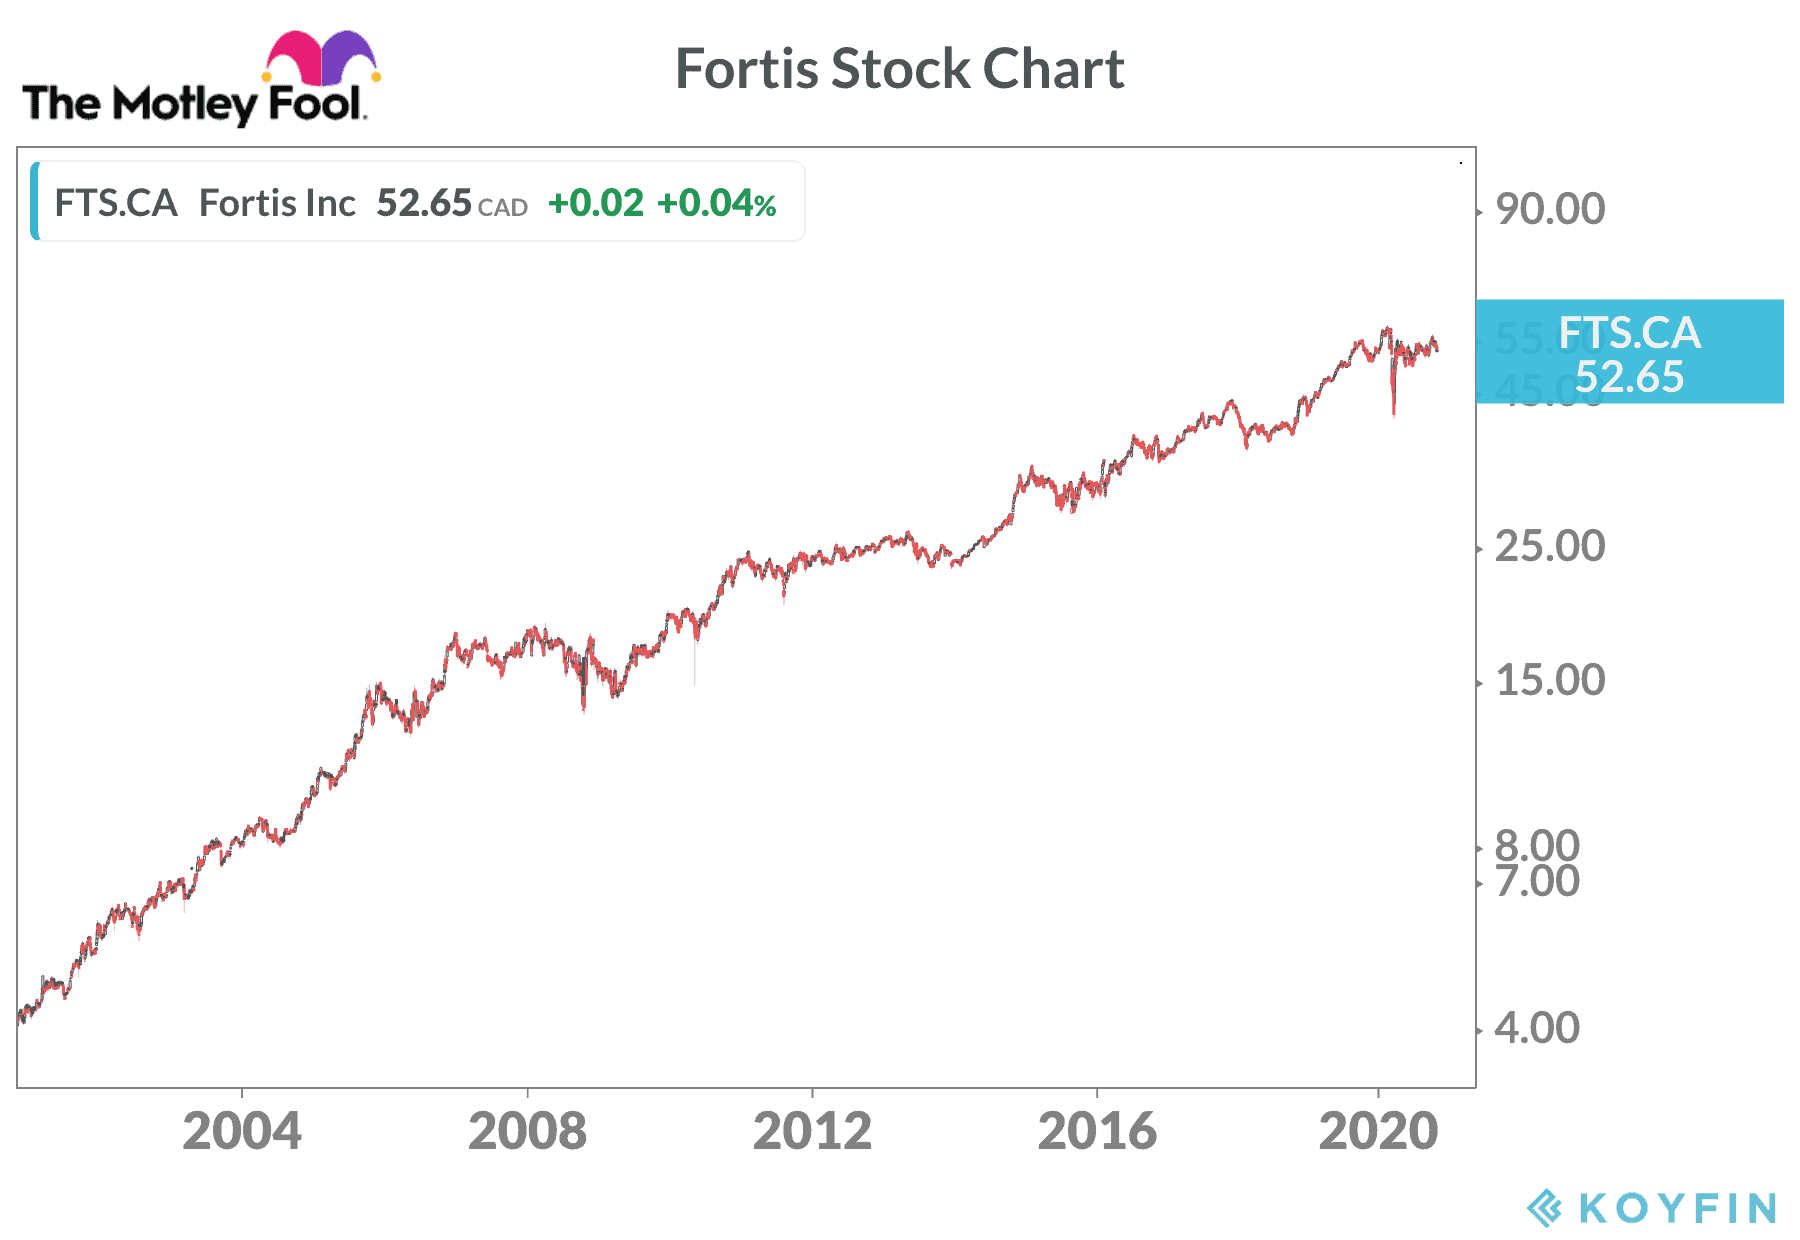 Fortis stock for a TFSA